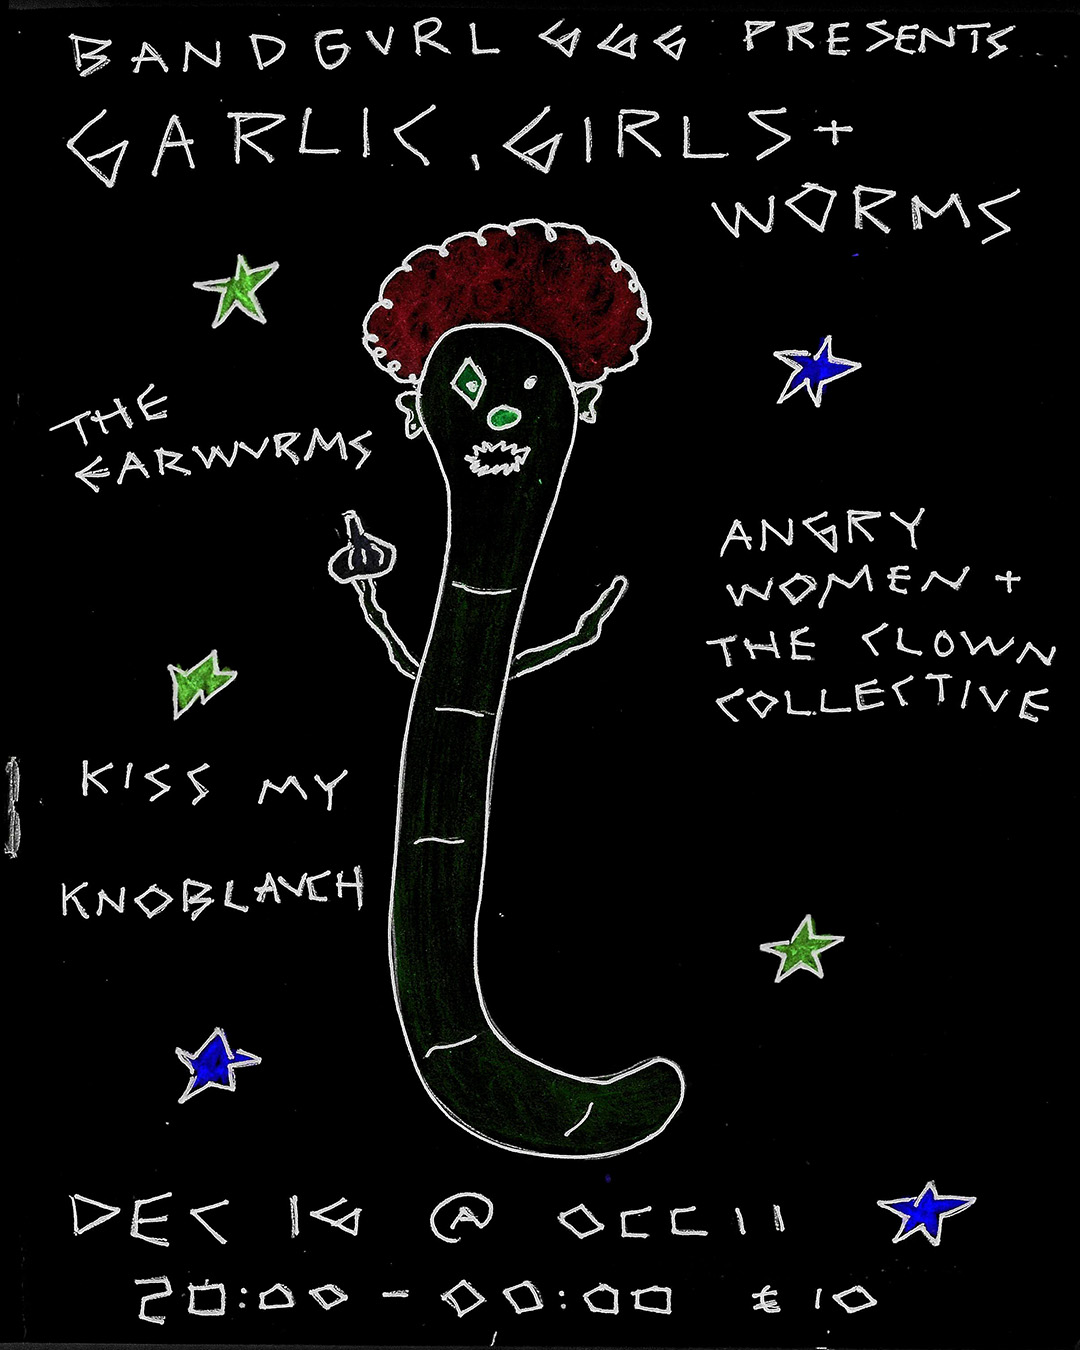 THE EARWURMS + ANGRY WOMEN & THE CLOWN COLLECTIVE + KISS MY KNOBLAUCH